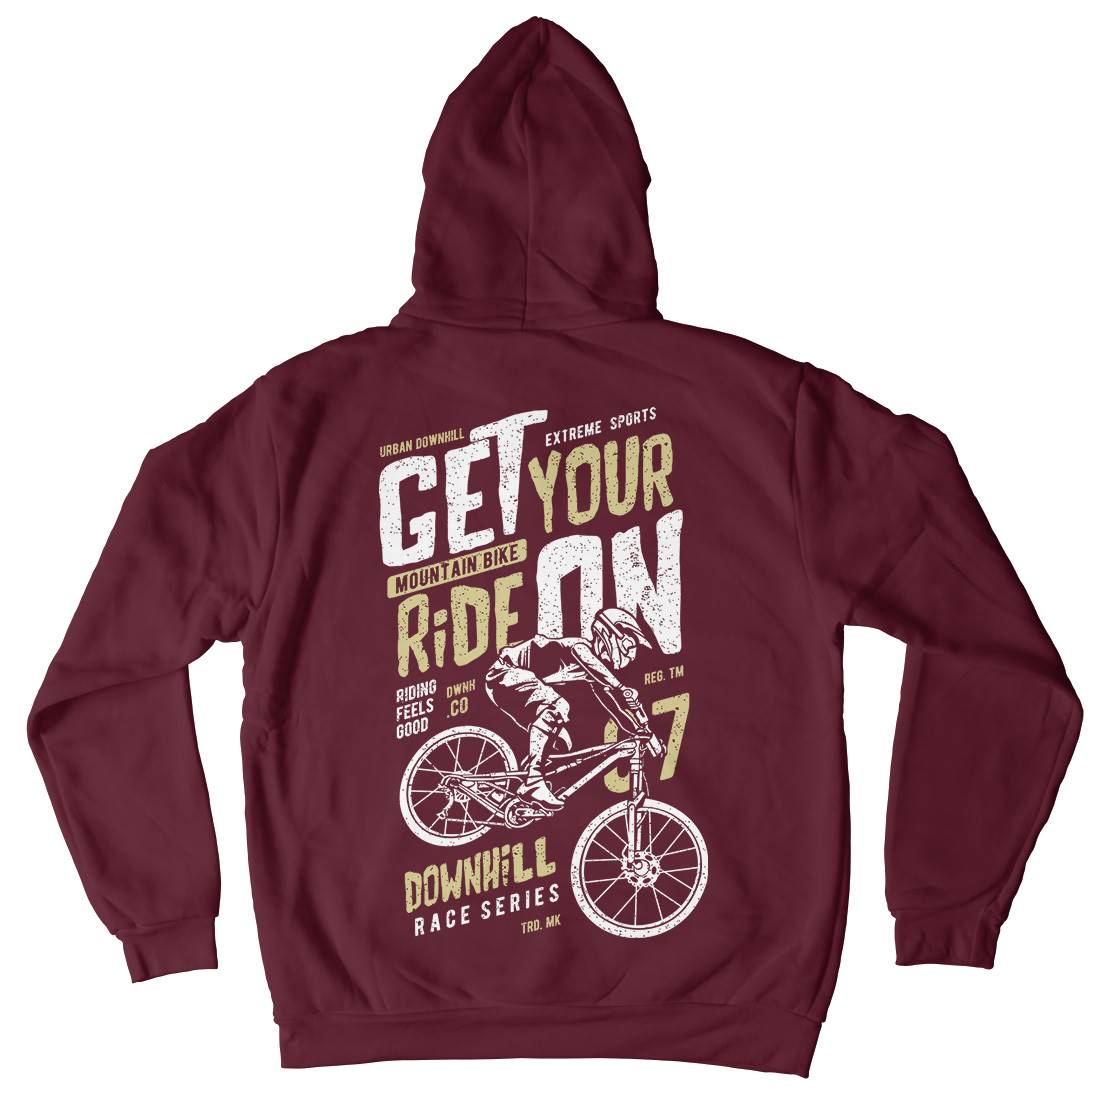 Get Your Ride Mens Hoodie With Pocket Bikes A673